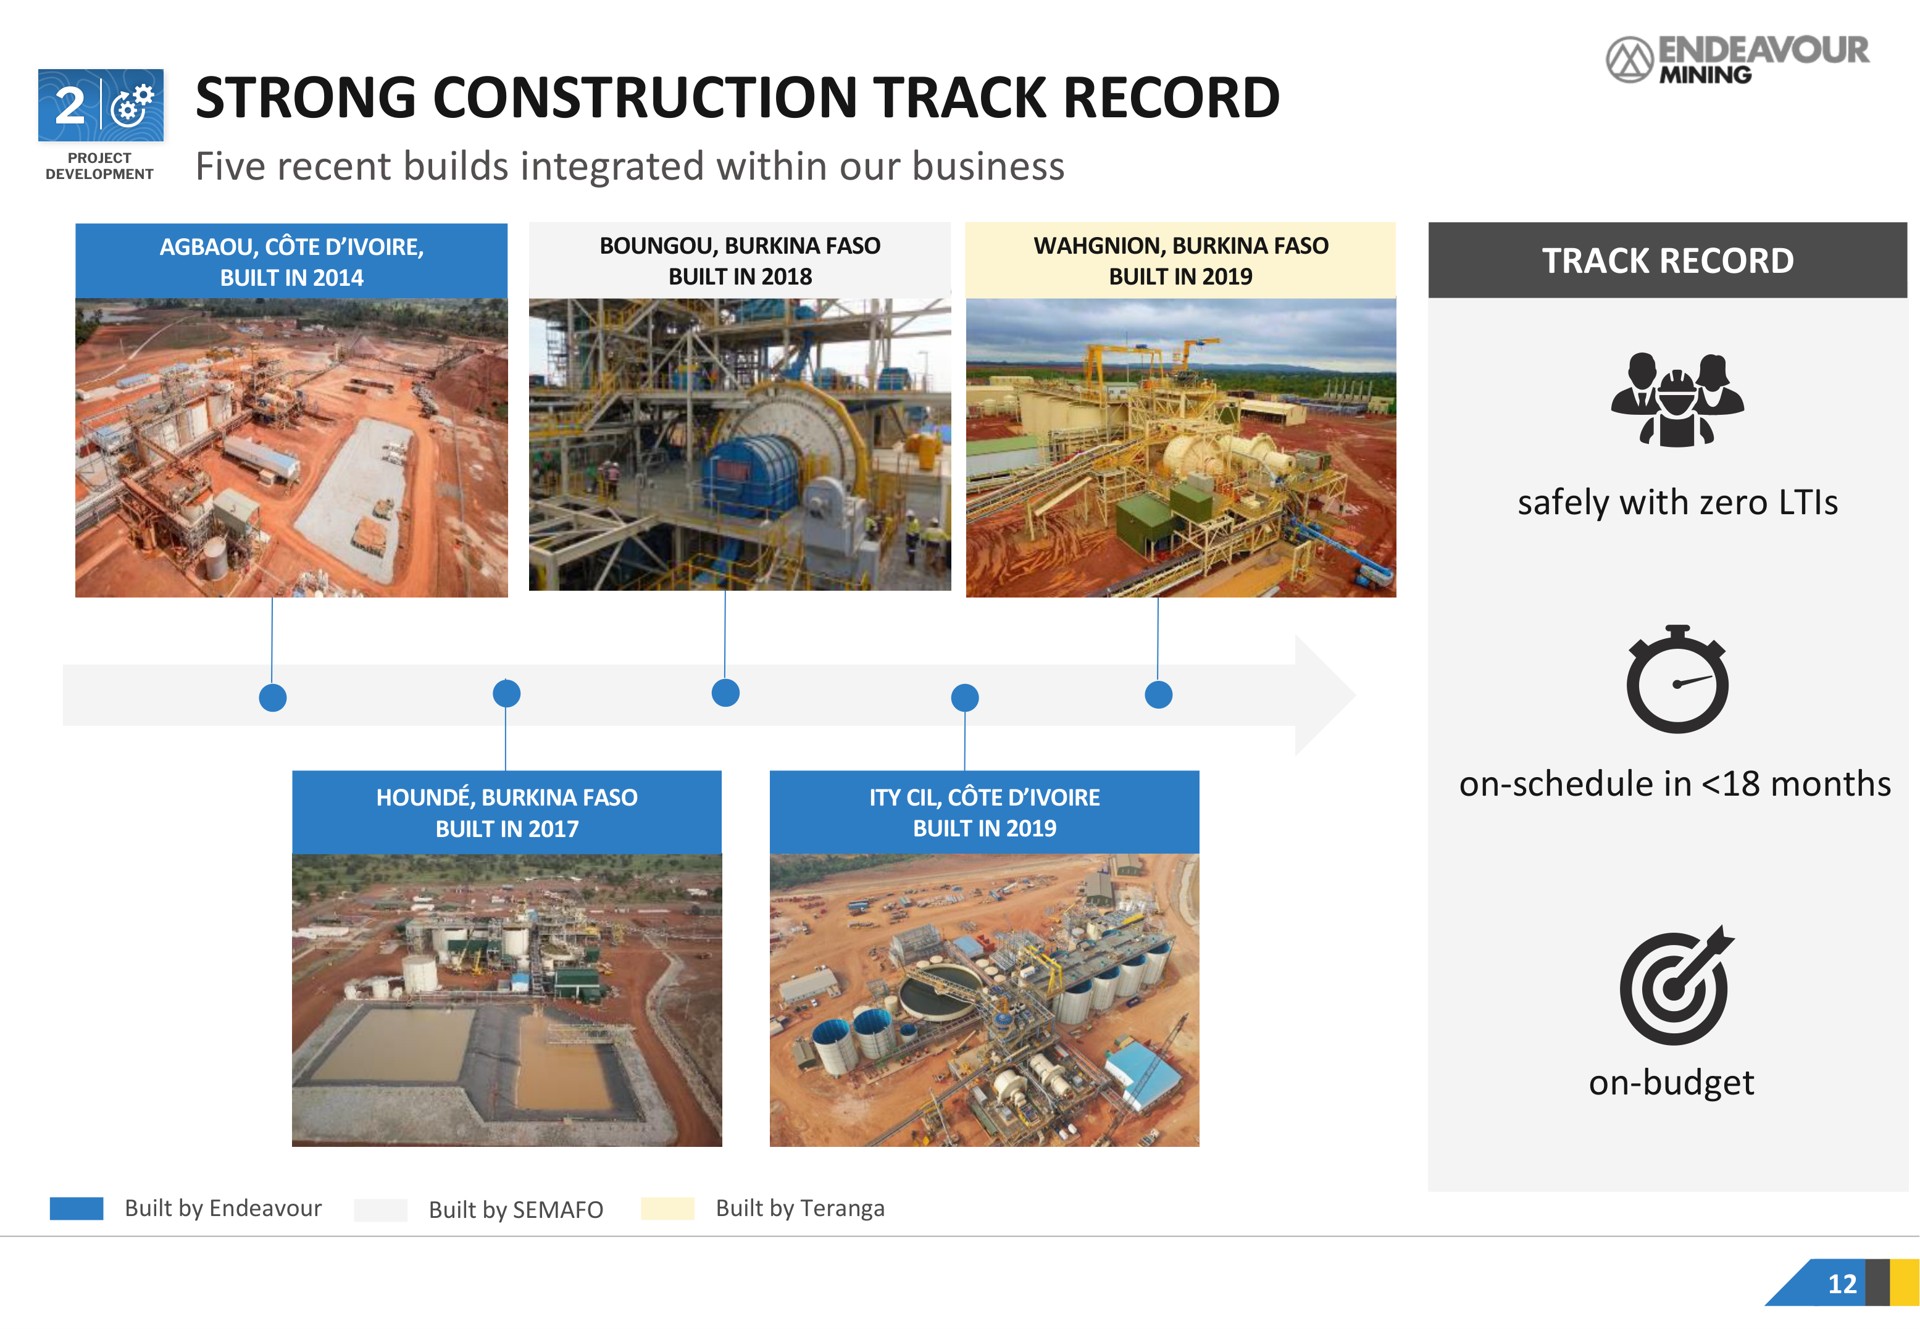 strong construction track record five recent builds integrated within our business | Endeavour Mining